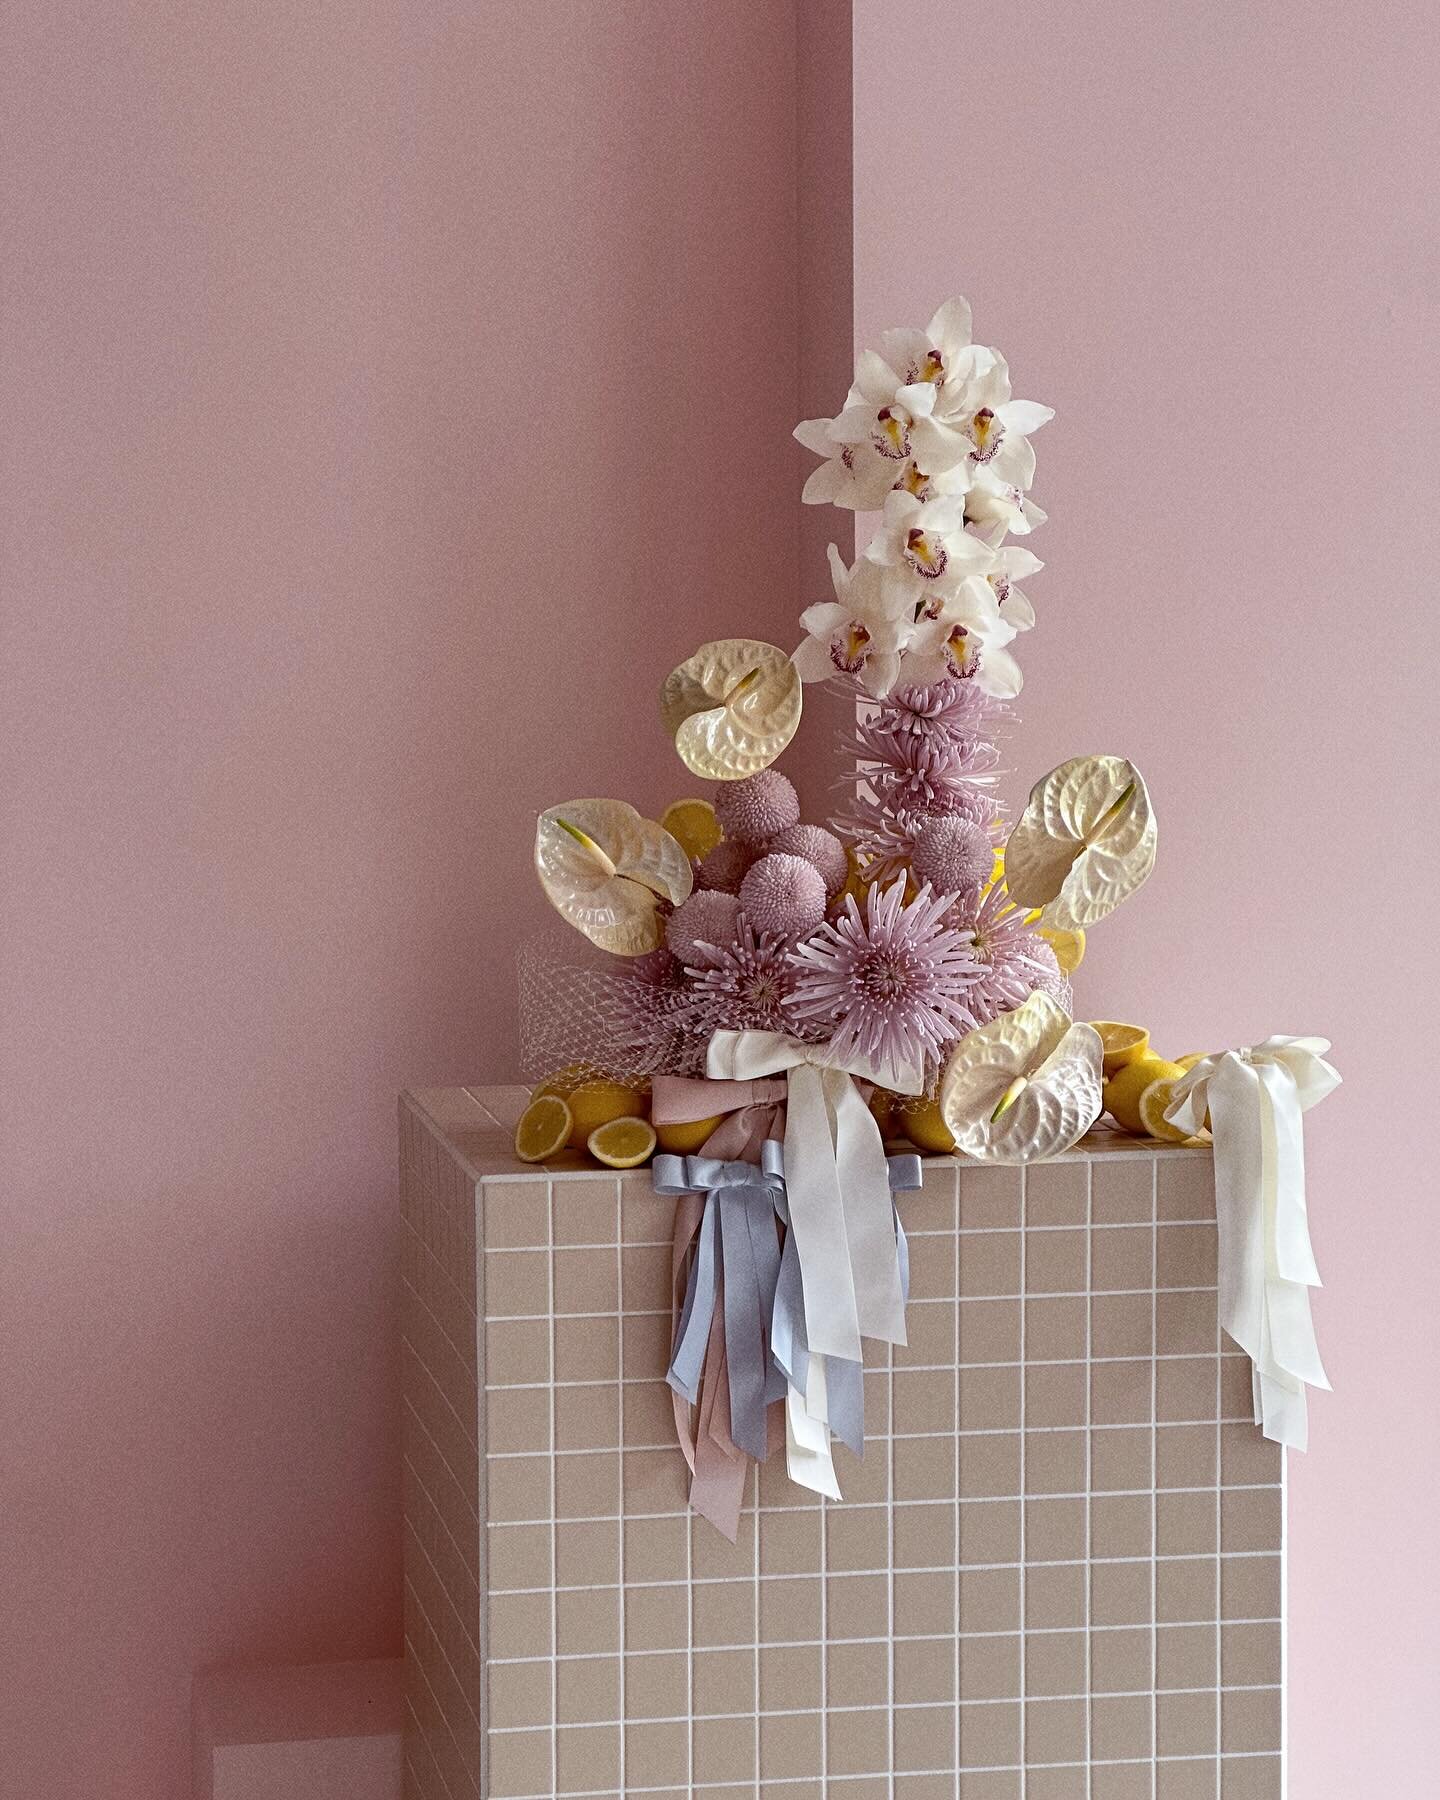 Starlight, star bright, baby.

Ivory, pearl, butter, lemon butter, lemon, marshmallow &amp; rose-champagne with pops of periwinkle + magenta. 

This piece was curated from a base of mixed-variety chrysanthemums dressed with custom coloured lemon pear